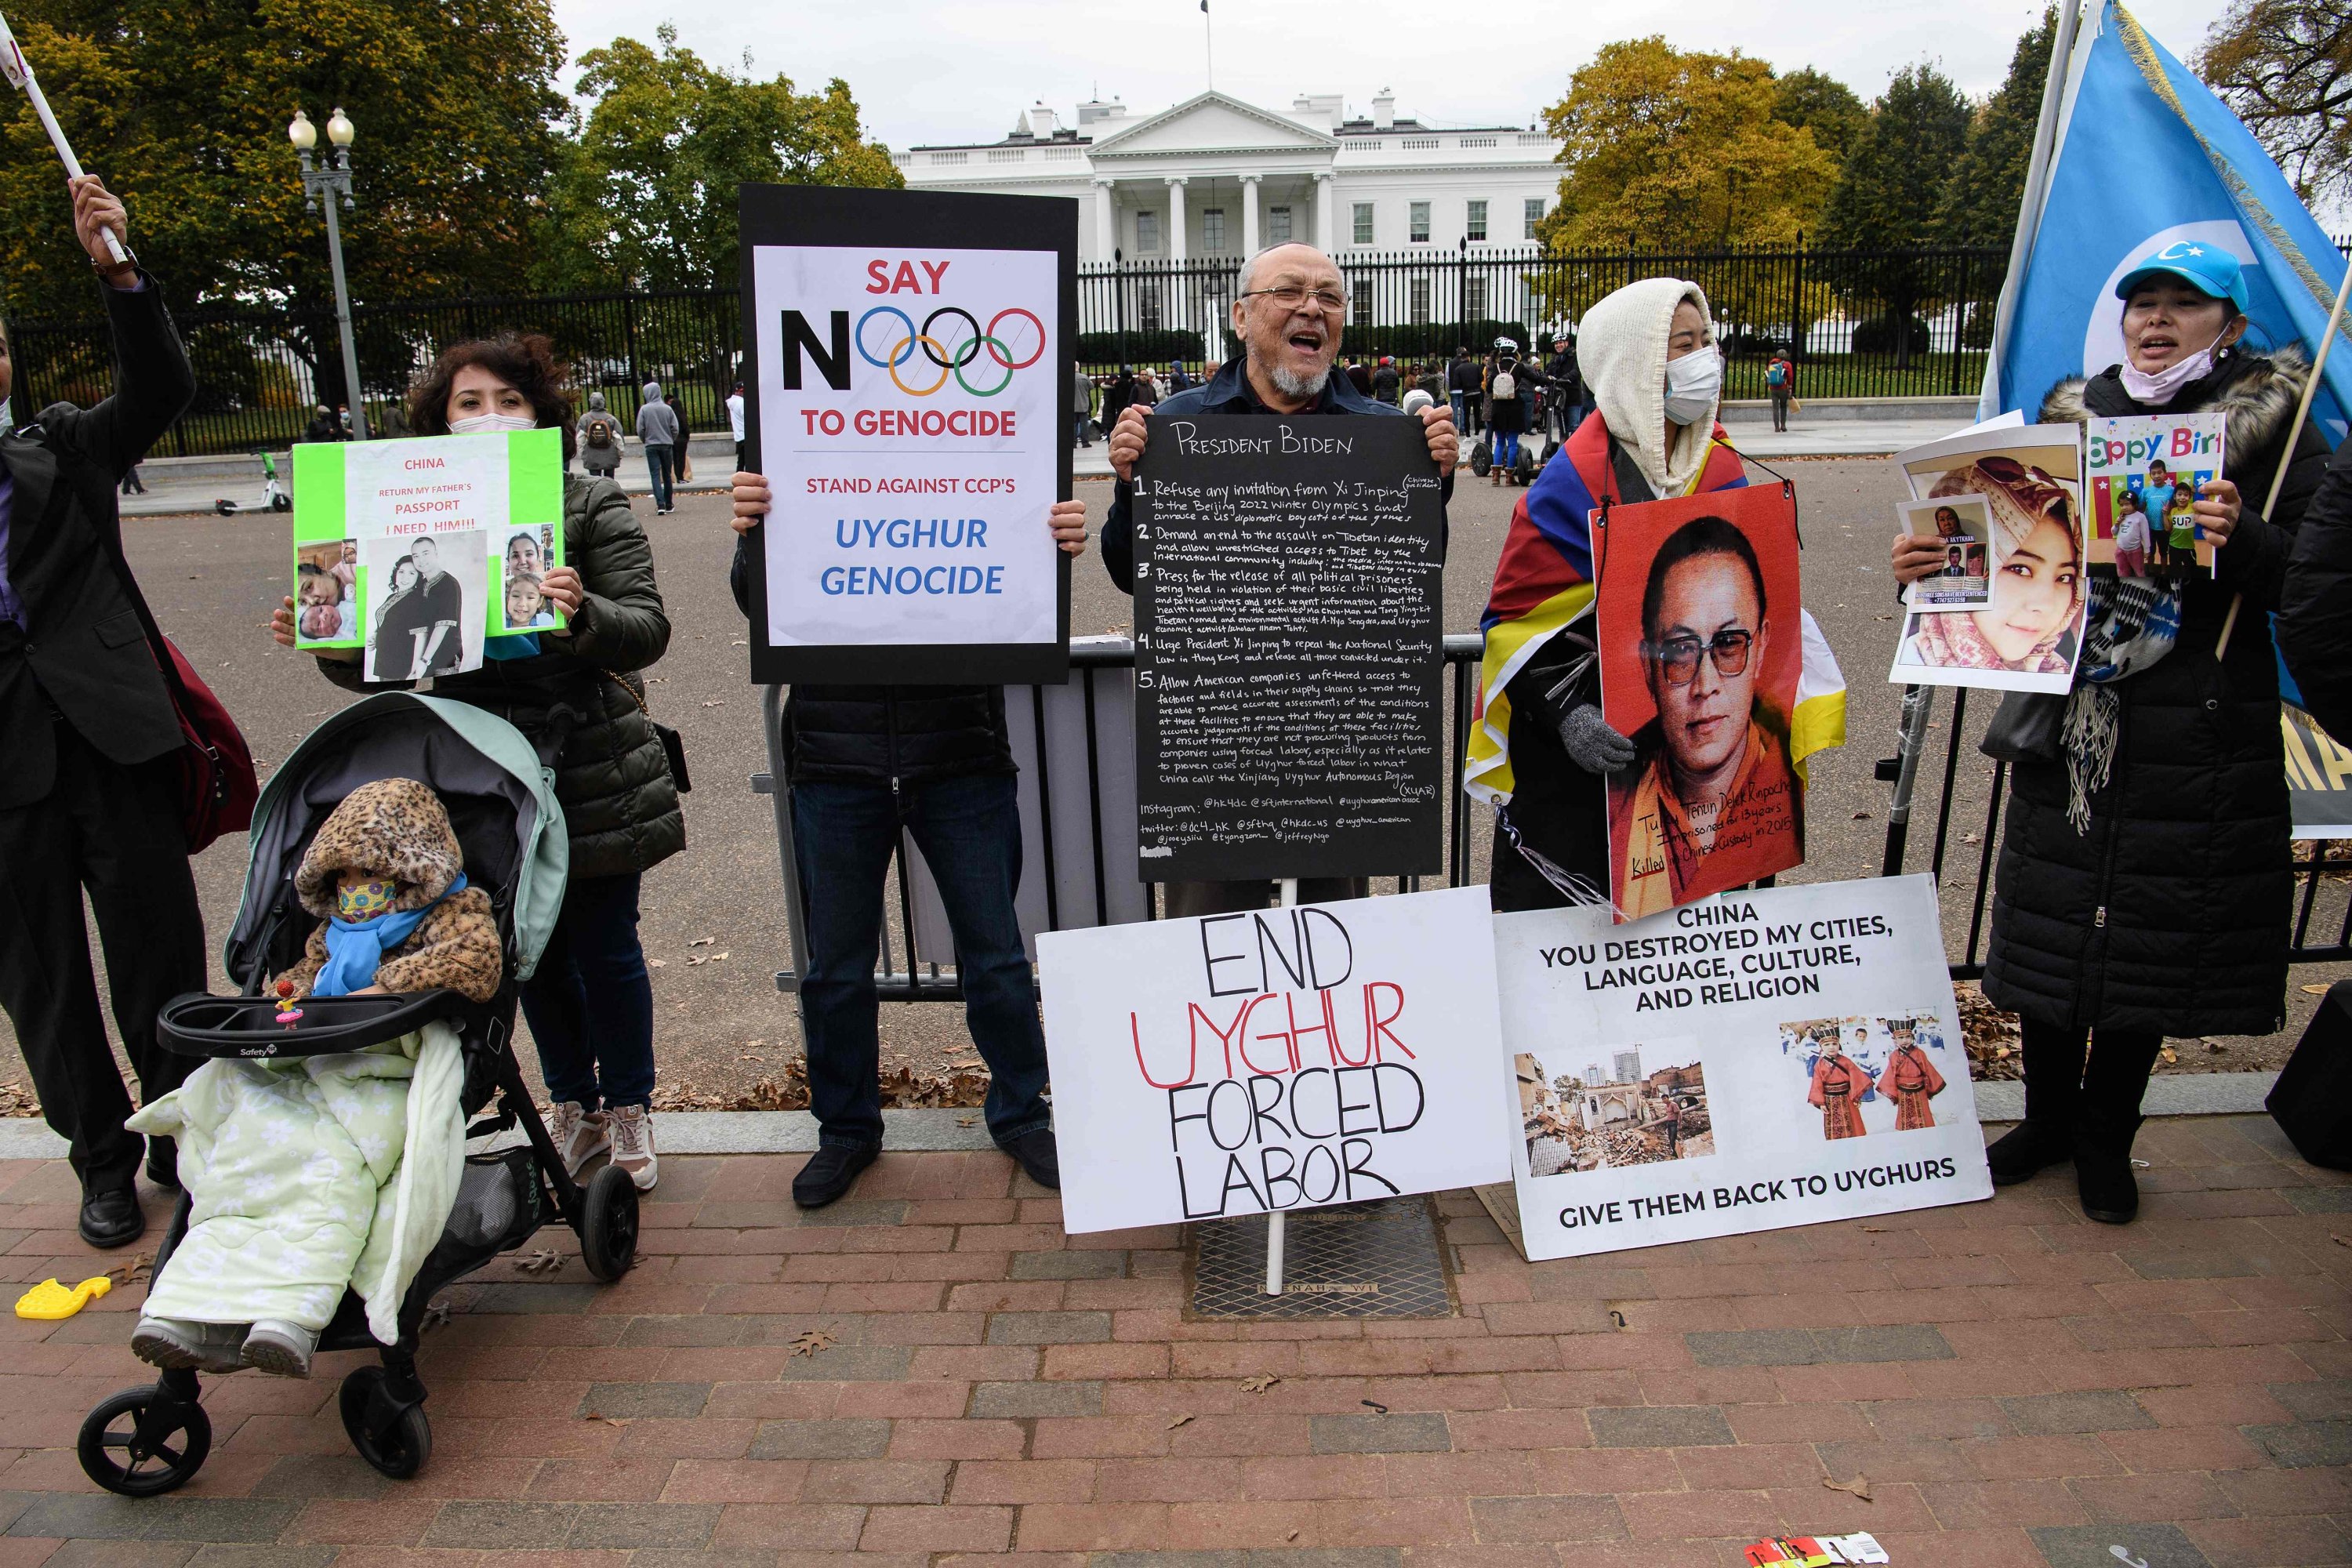 Uyghurs, Tibetans, Hongkongers and Taiwanese demonstrators protest in front of the White House urging U.S. President Joe Biden to support human rights, ahead of his virtual summit with his Chinese counterpart Xi Jinping in Washington, D.C., Nov. 14, 2021,  (AFP Photo)